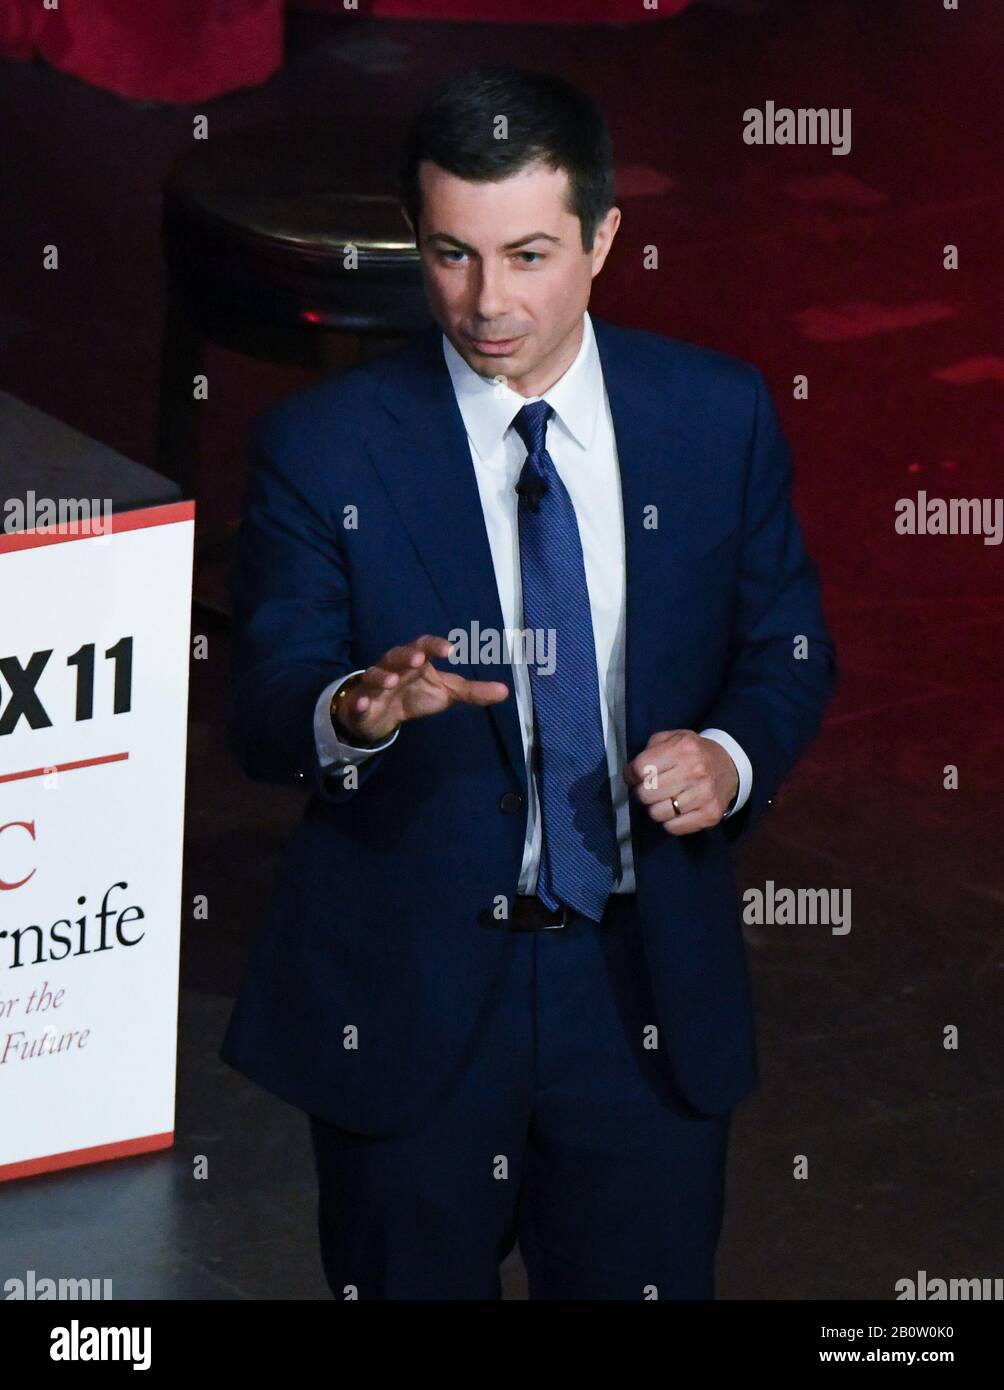 Democratic presidential candidate Pete Buttigieg on stage at Fox11 Town Hall to speak at a USC Political Assembly at Bovard Auditorium at USC on February 21, 2020 in Los Angeles, California.. Stock Photo